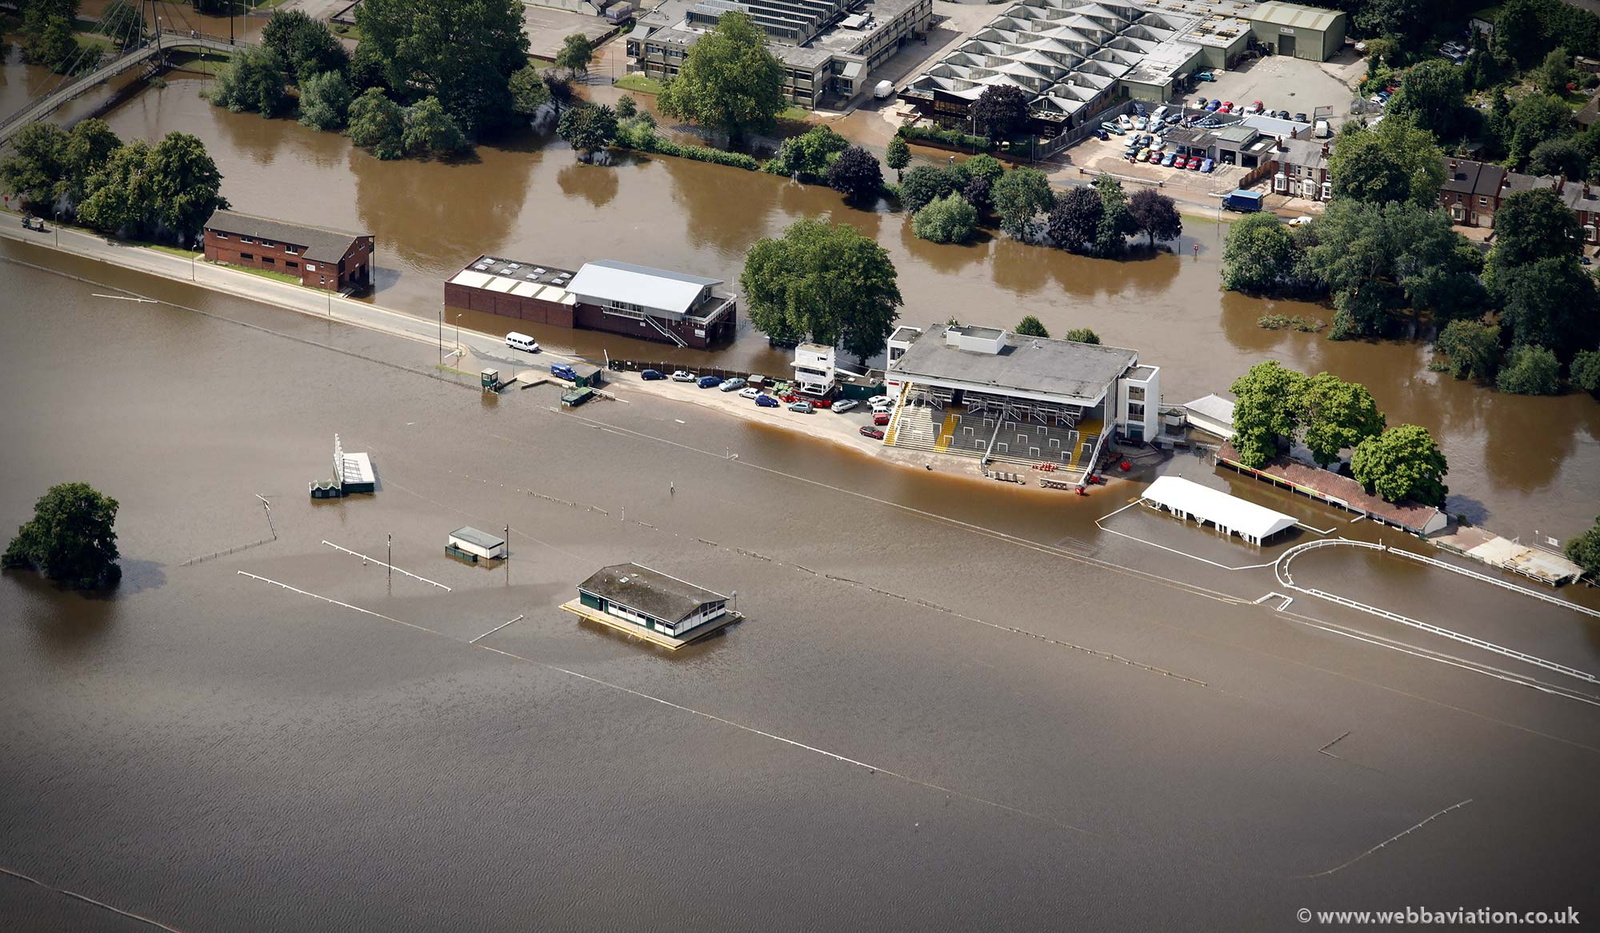 Worcester Racecourse during the great River Severn floods of 2007 from the air